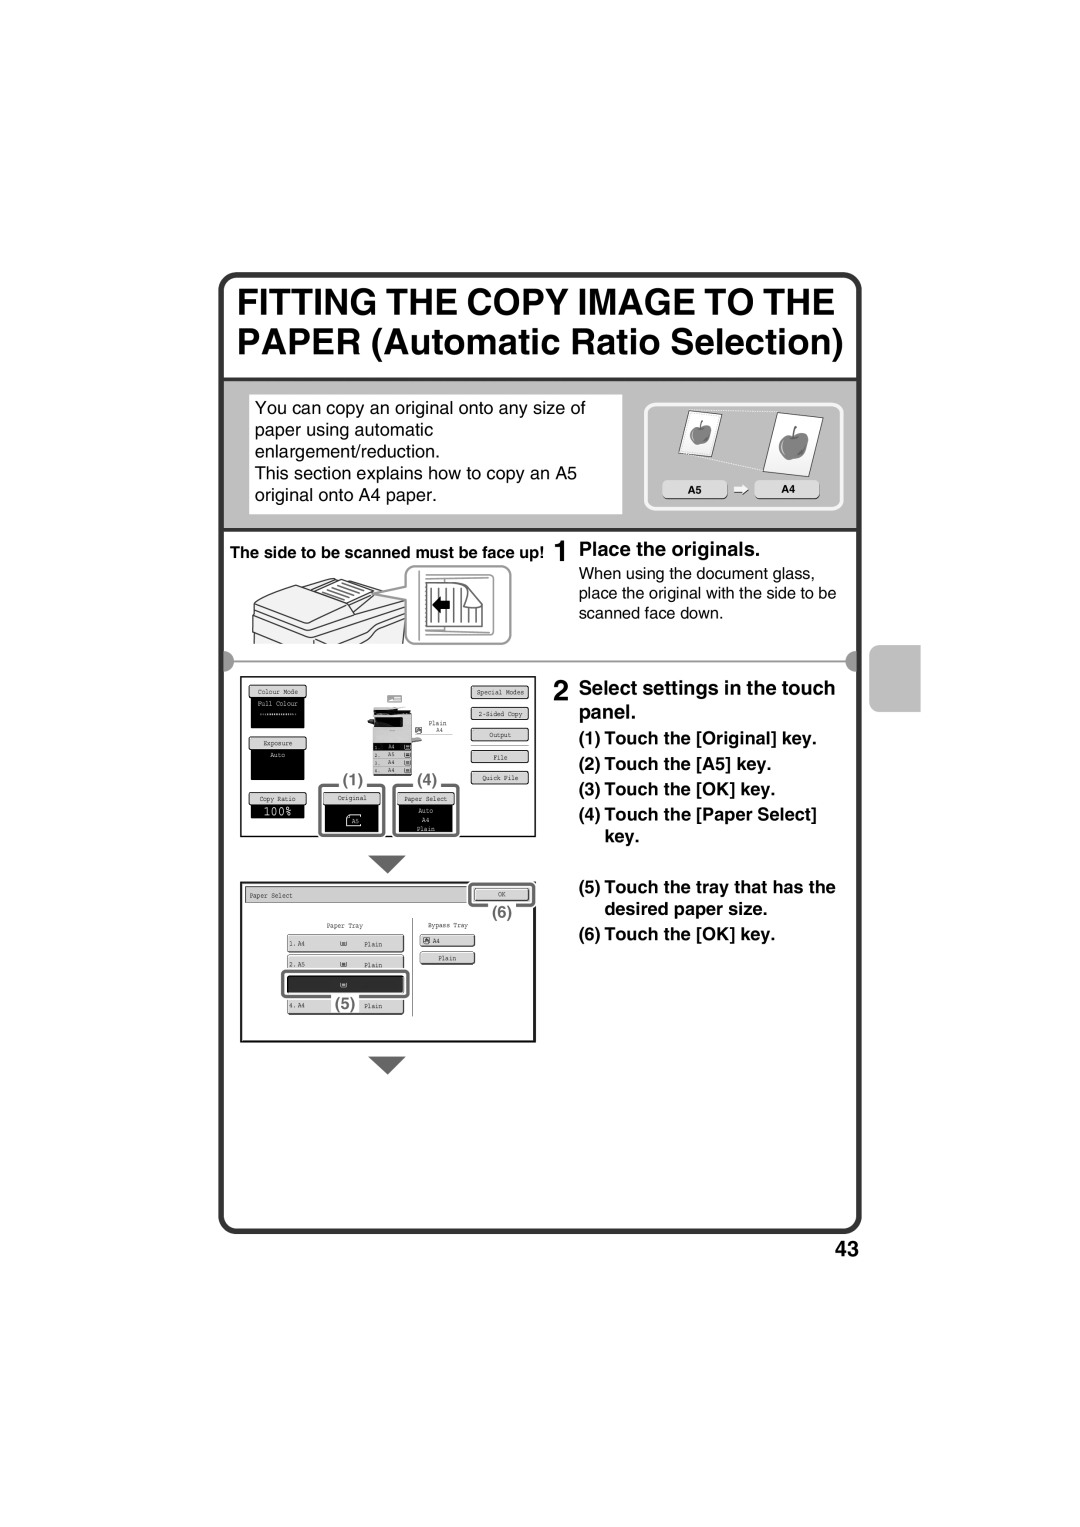 Sharp MX-C381, MX-C311 FITTING THE COPY IMAGE TO THE PAPER Automatic Ratio Selection, original onto A4 paper, 100%, Plain 